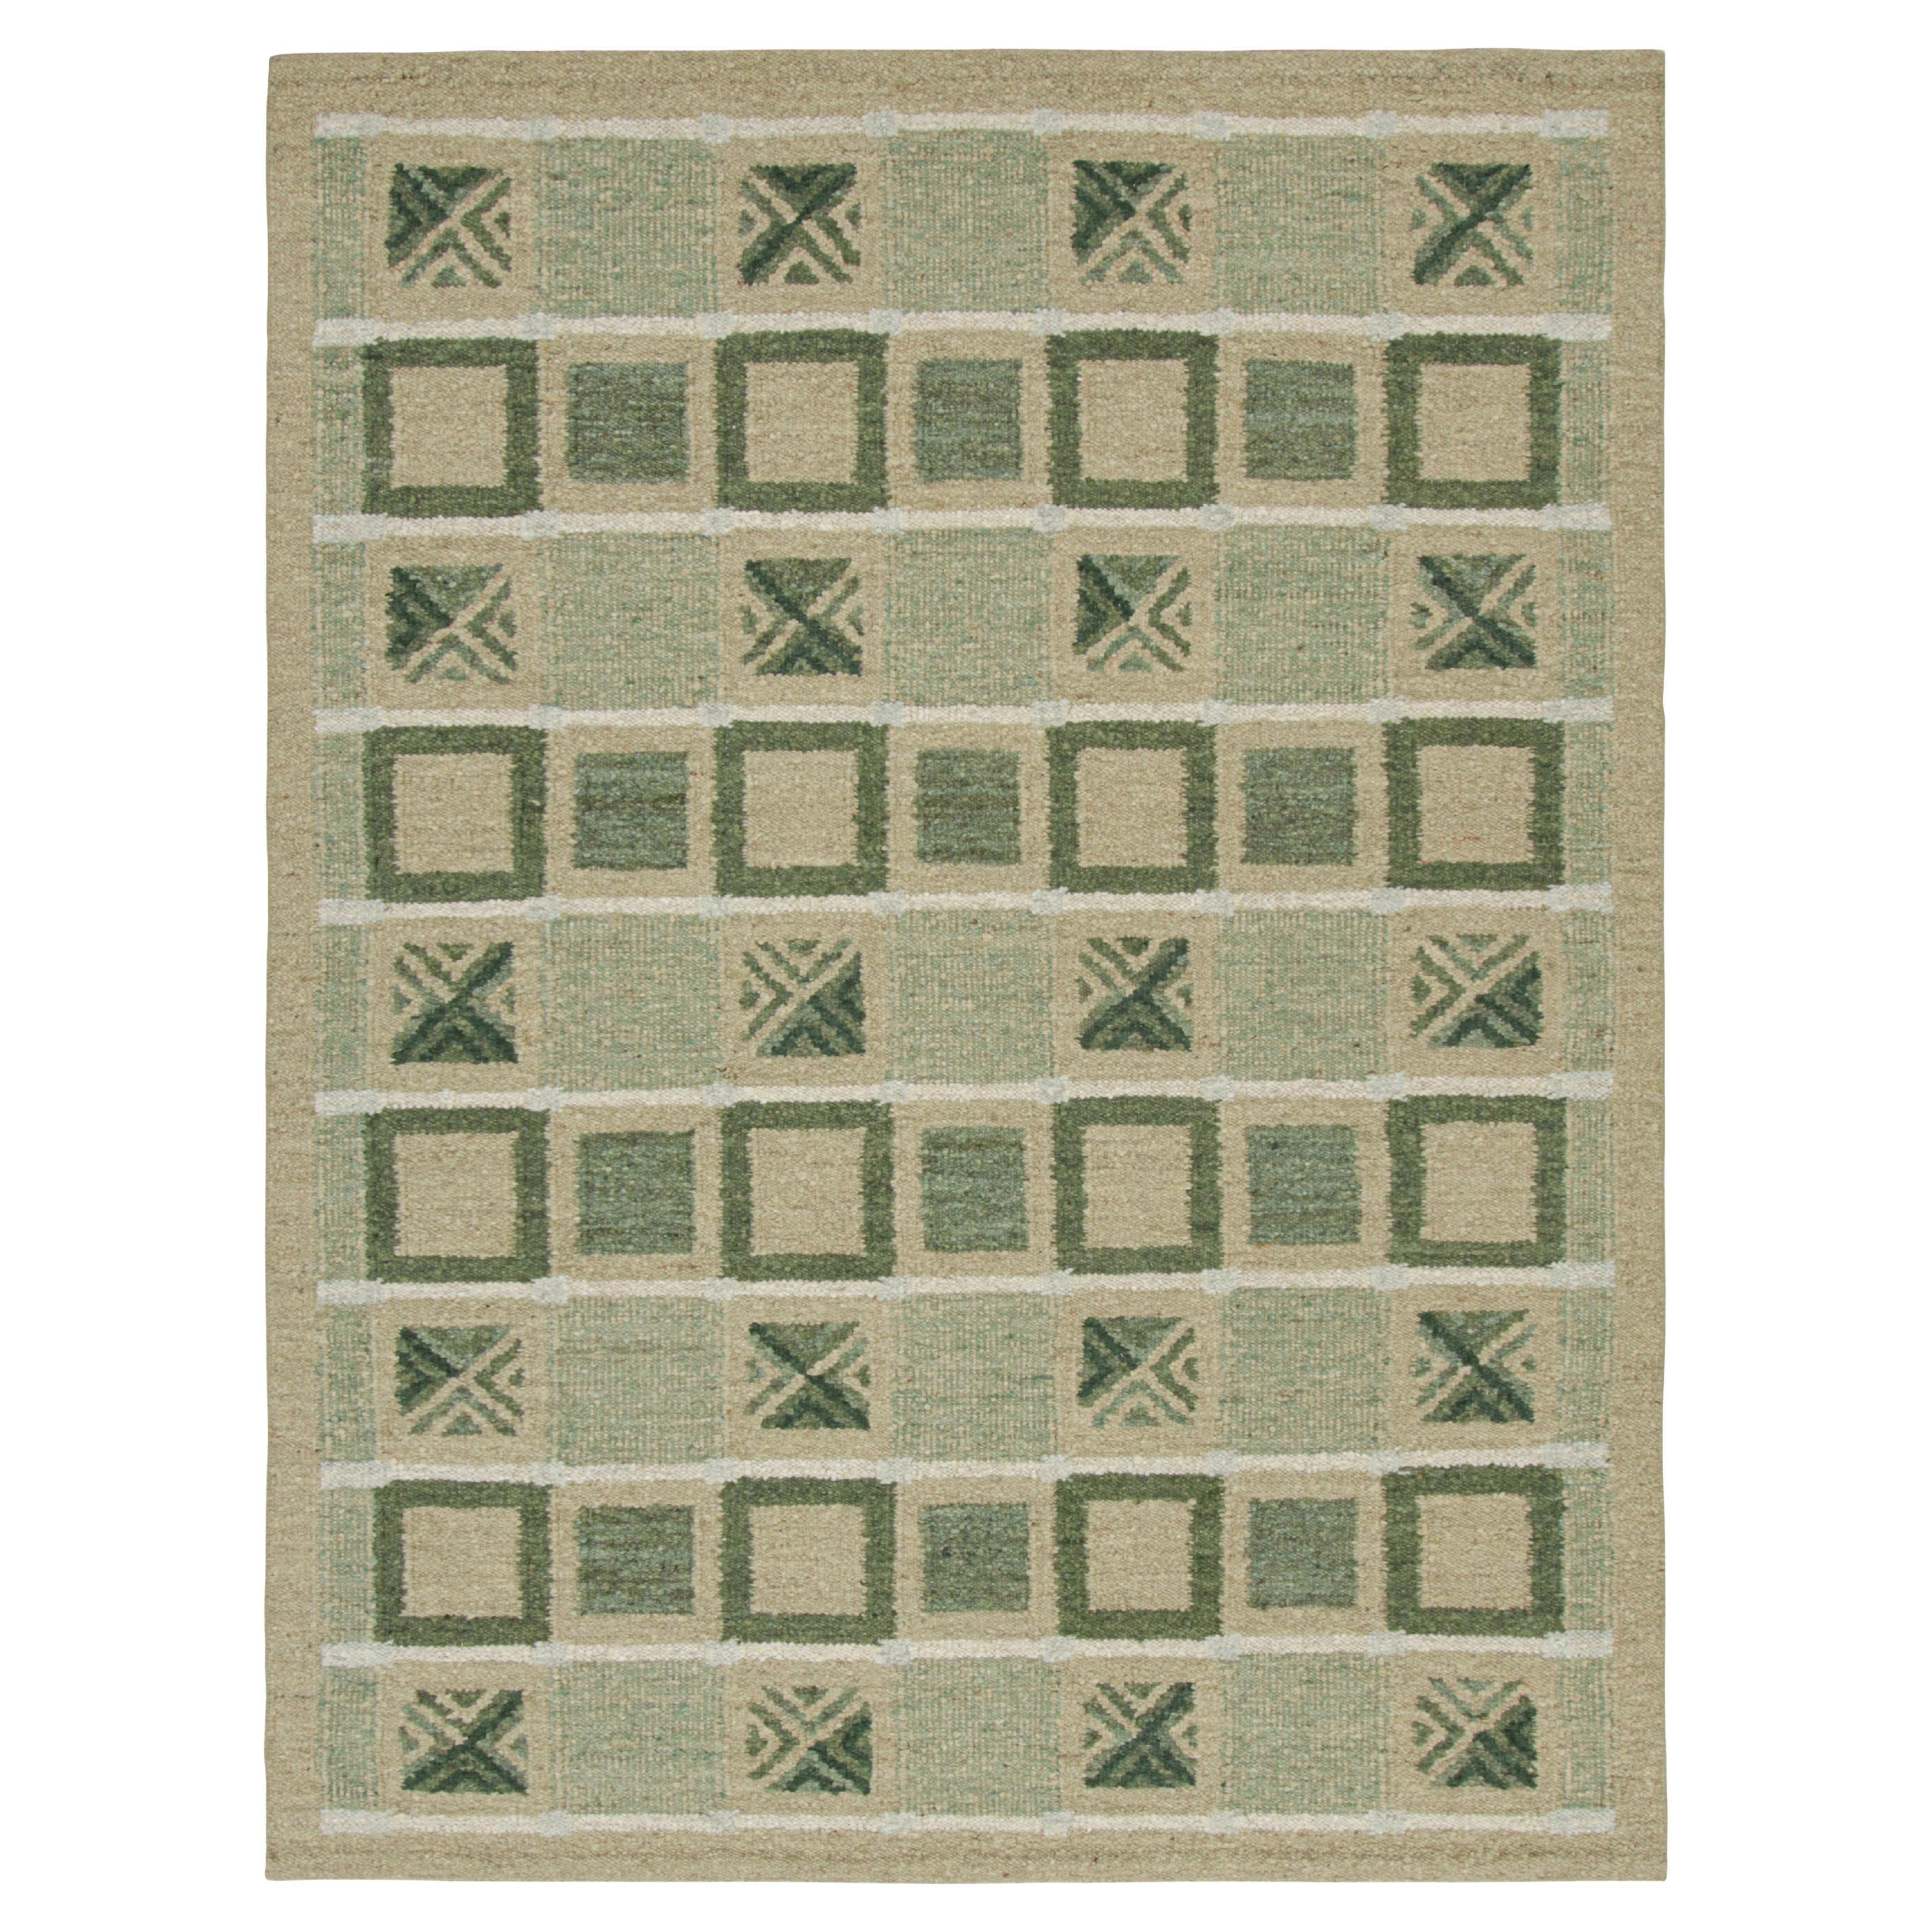 Rug & Kilim’s Scandinavian Style Rug with Green, Beige-Brown Geometric Patterns For Sale